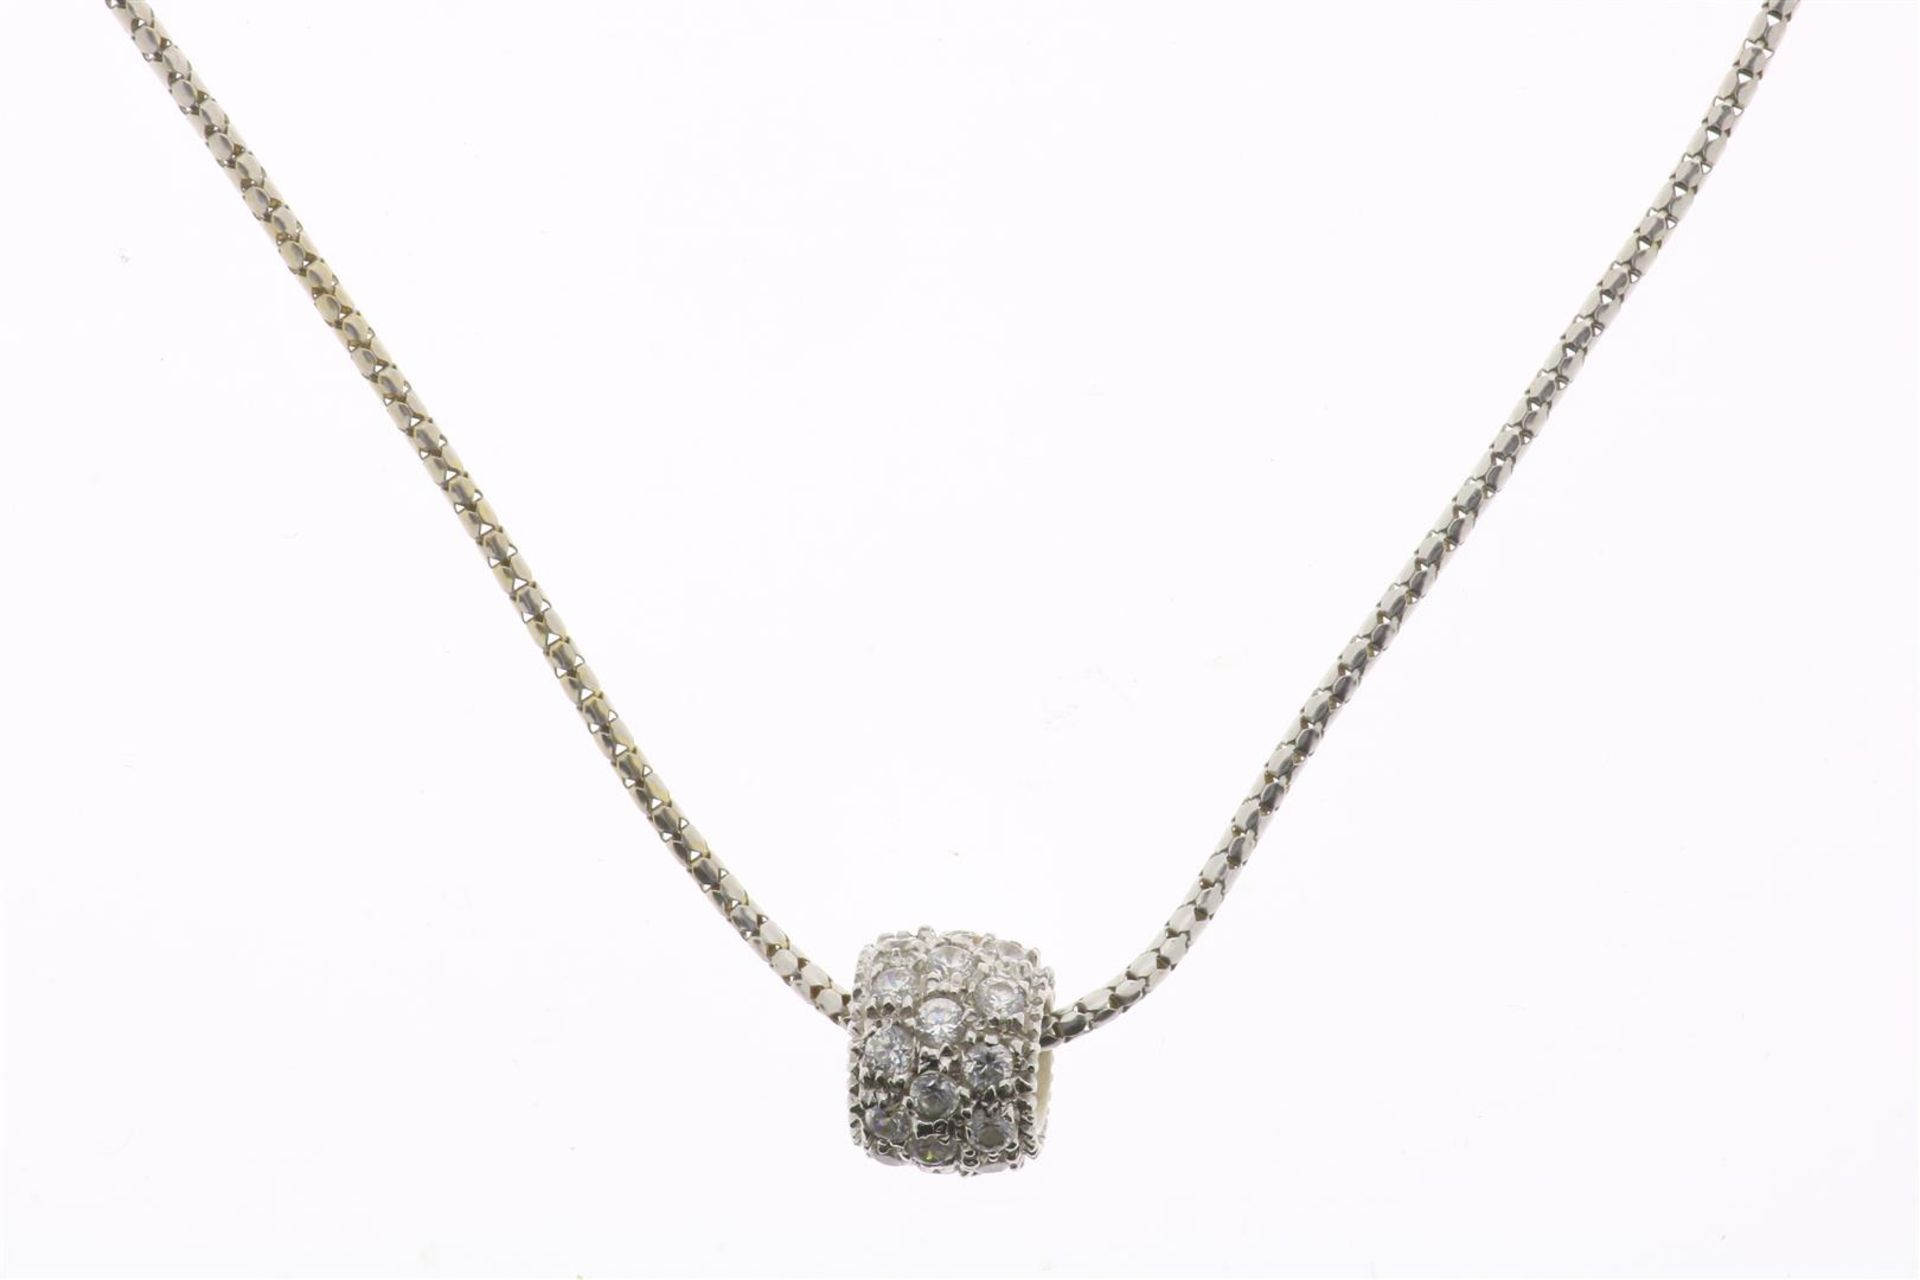 White gold necklace with bead. At the discretion of a jewelry expert.